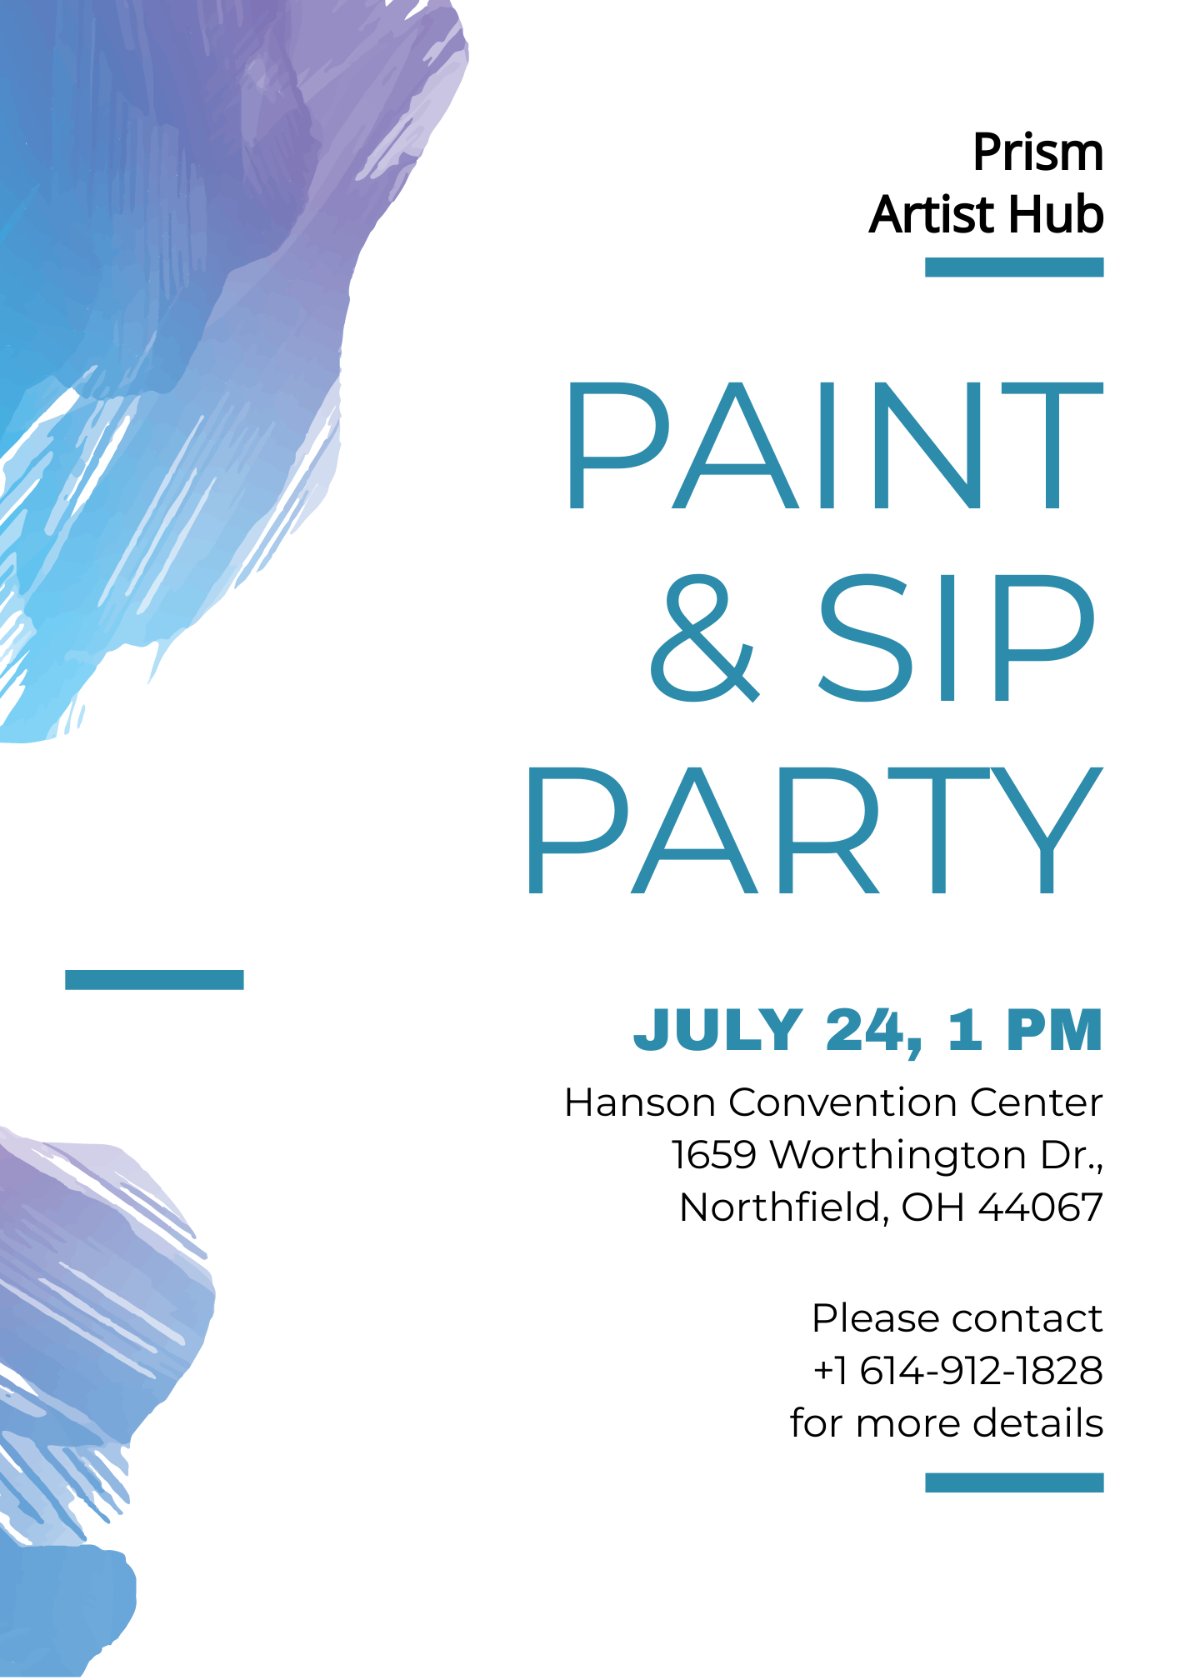 Modern Paint and Sip Invitation Template